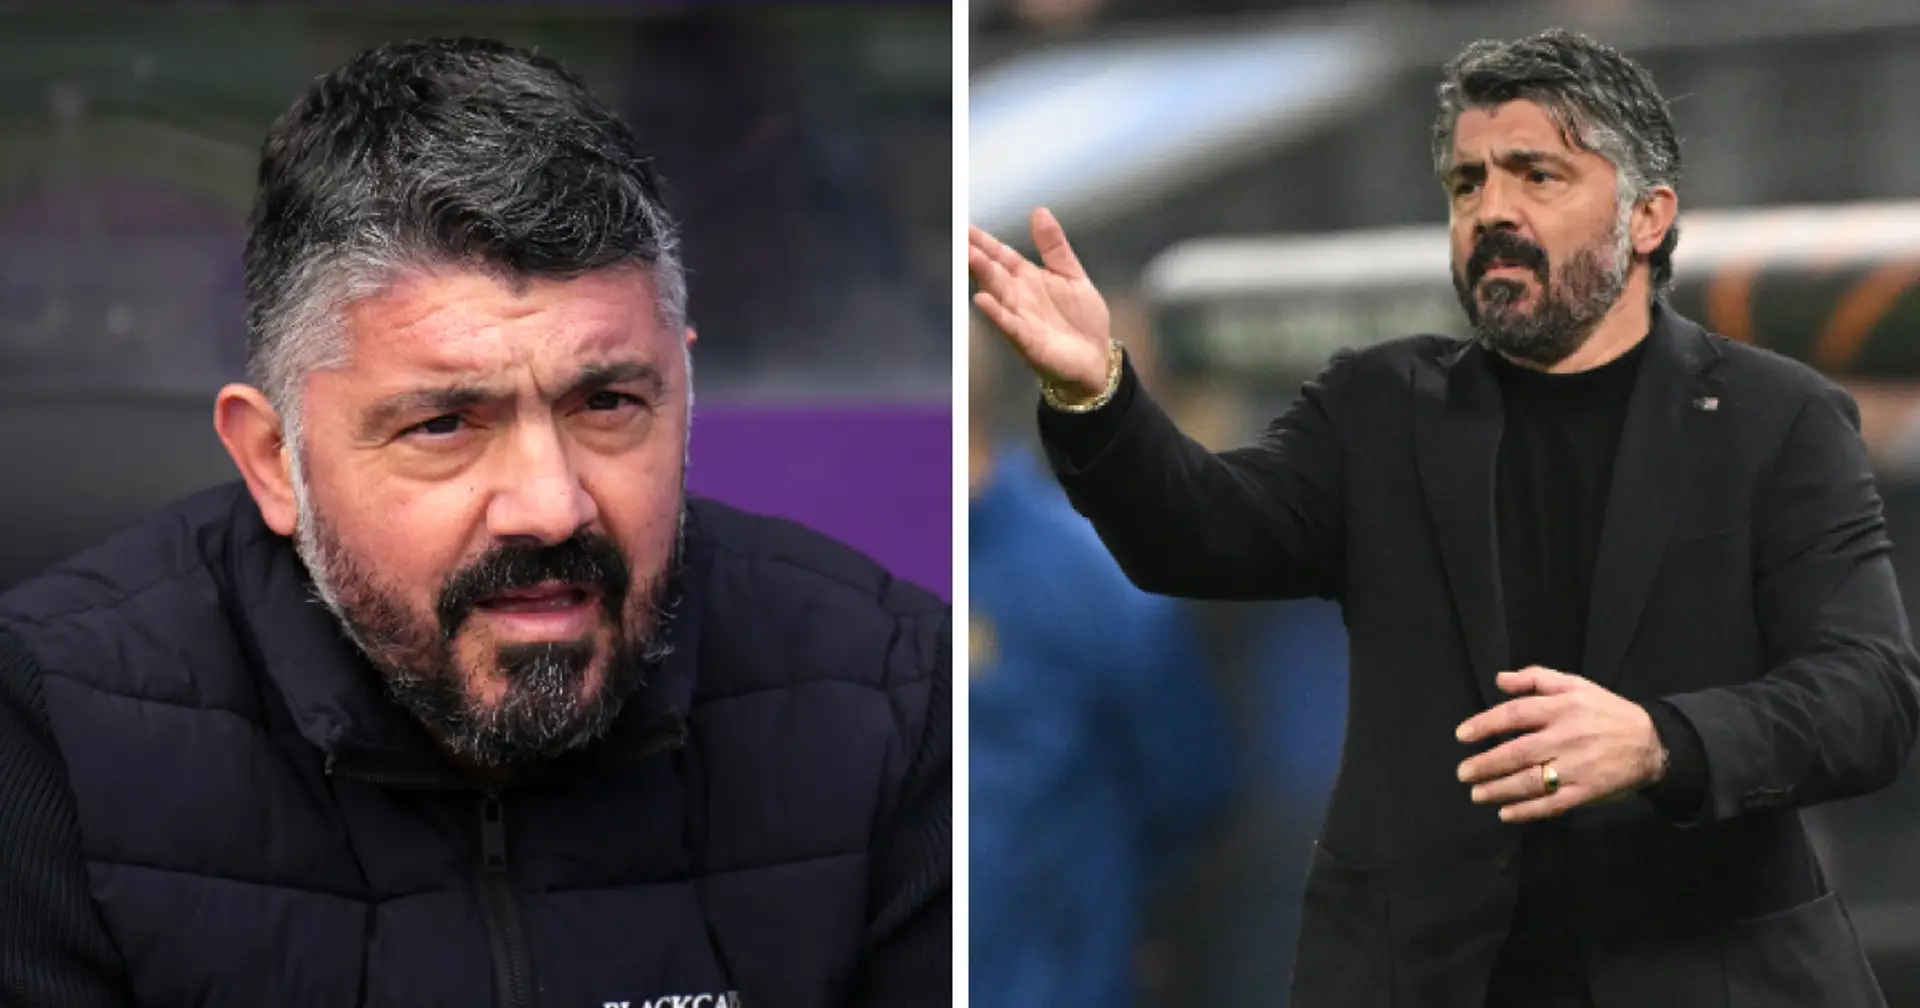 'We hit rock bottom and it’s impossible to go deeper down': Gattuso sacked by Olympique Marseille